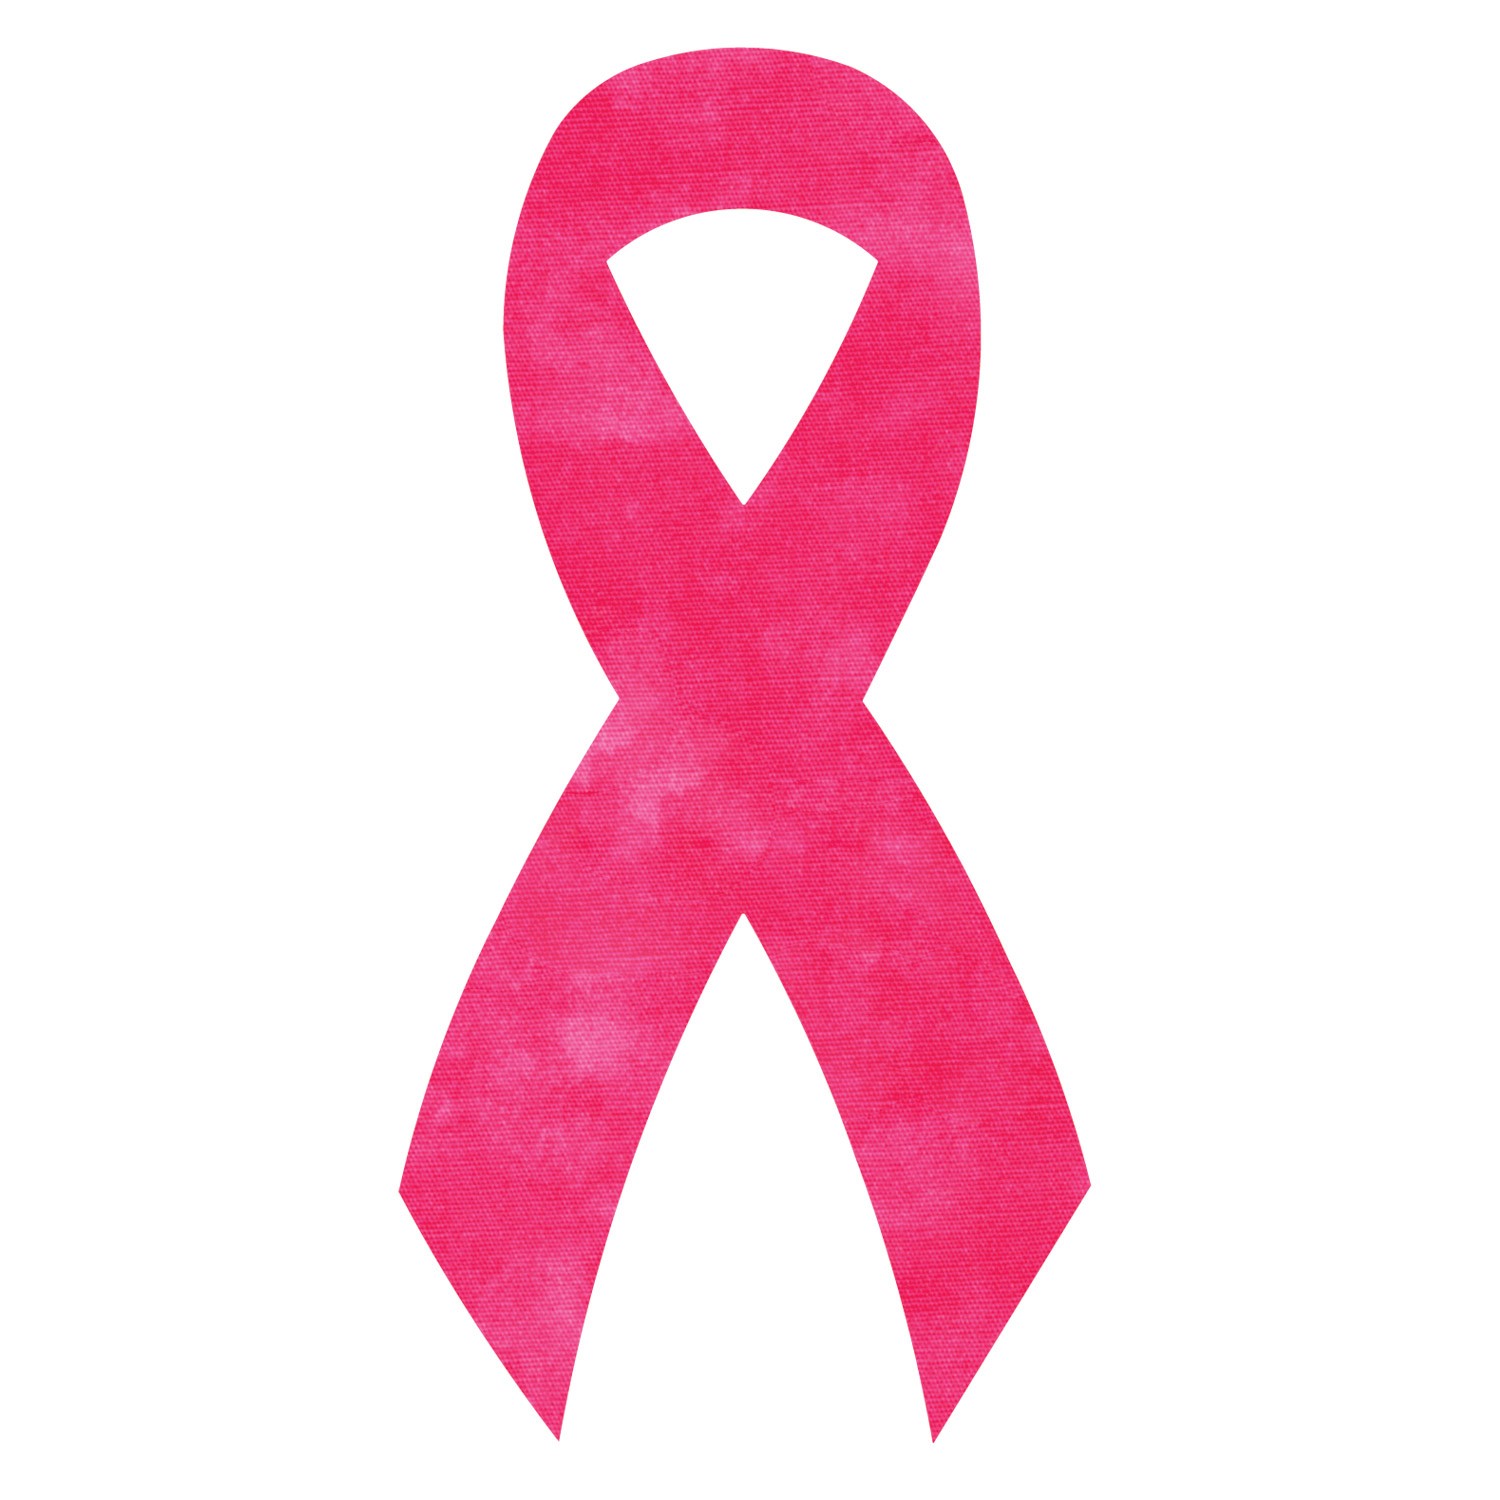 Pink Breast Cancer Ribbon Clip Art   Clipart Best